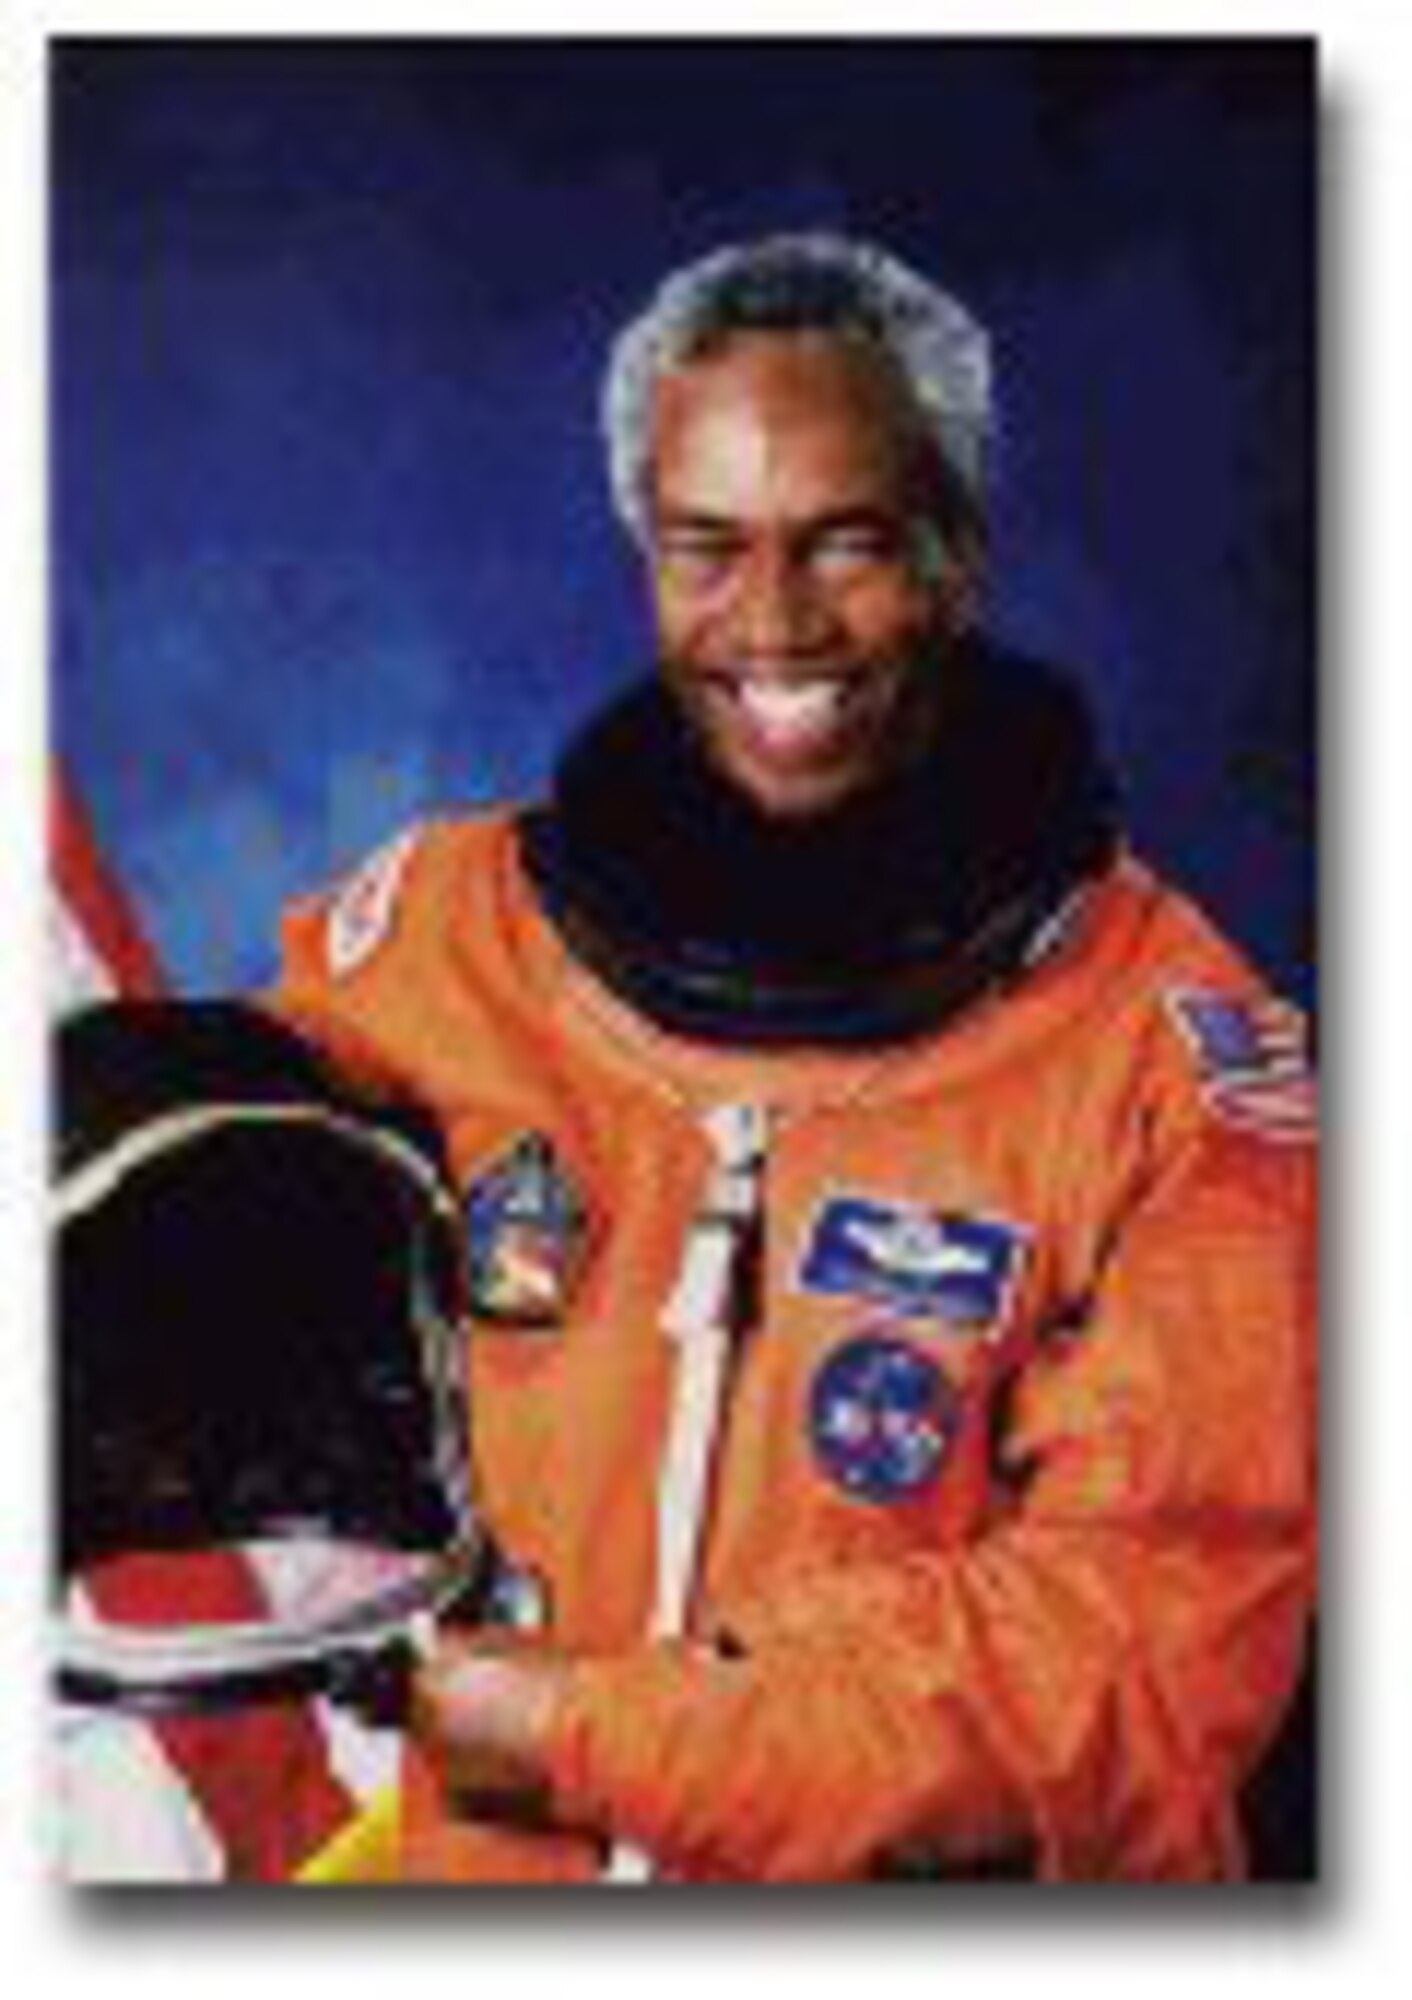 Col. Guion Bluford: First African-American astronaut